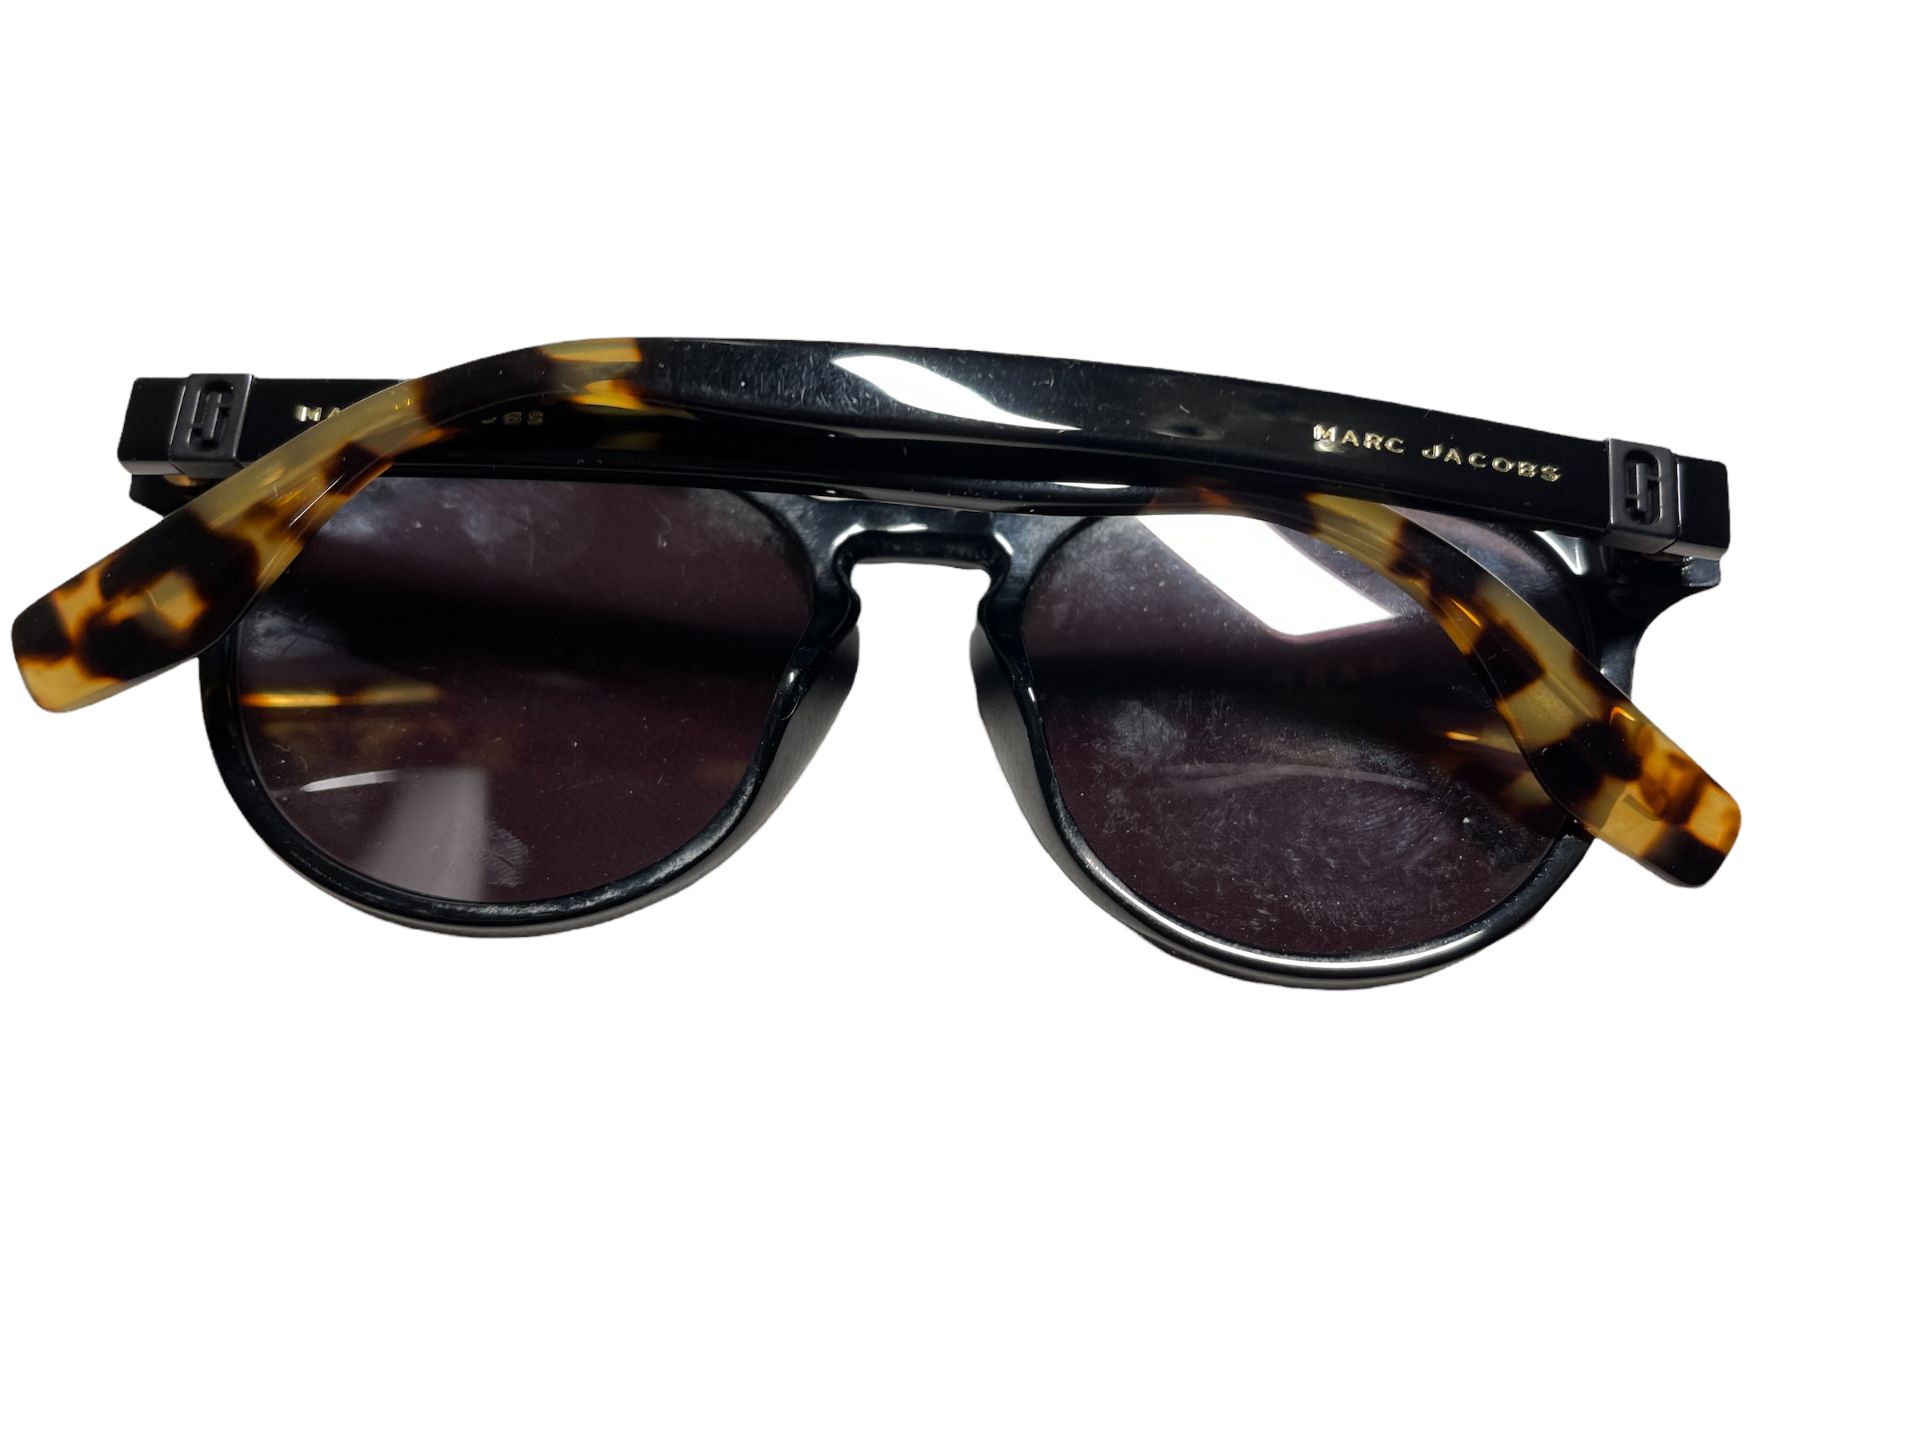 Marc Jacobs Ladies Sunglasses - Ex Demo or Surplus Stock from our Private Jet Charter - Image 9 of 10